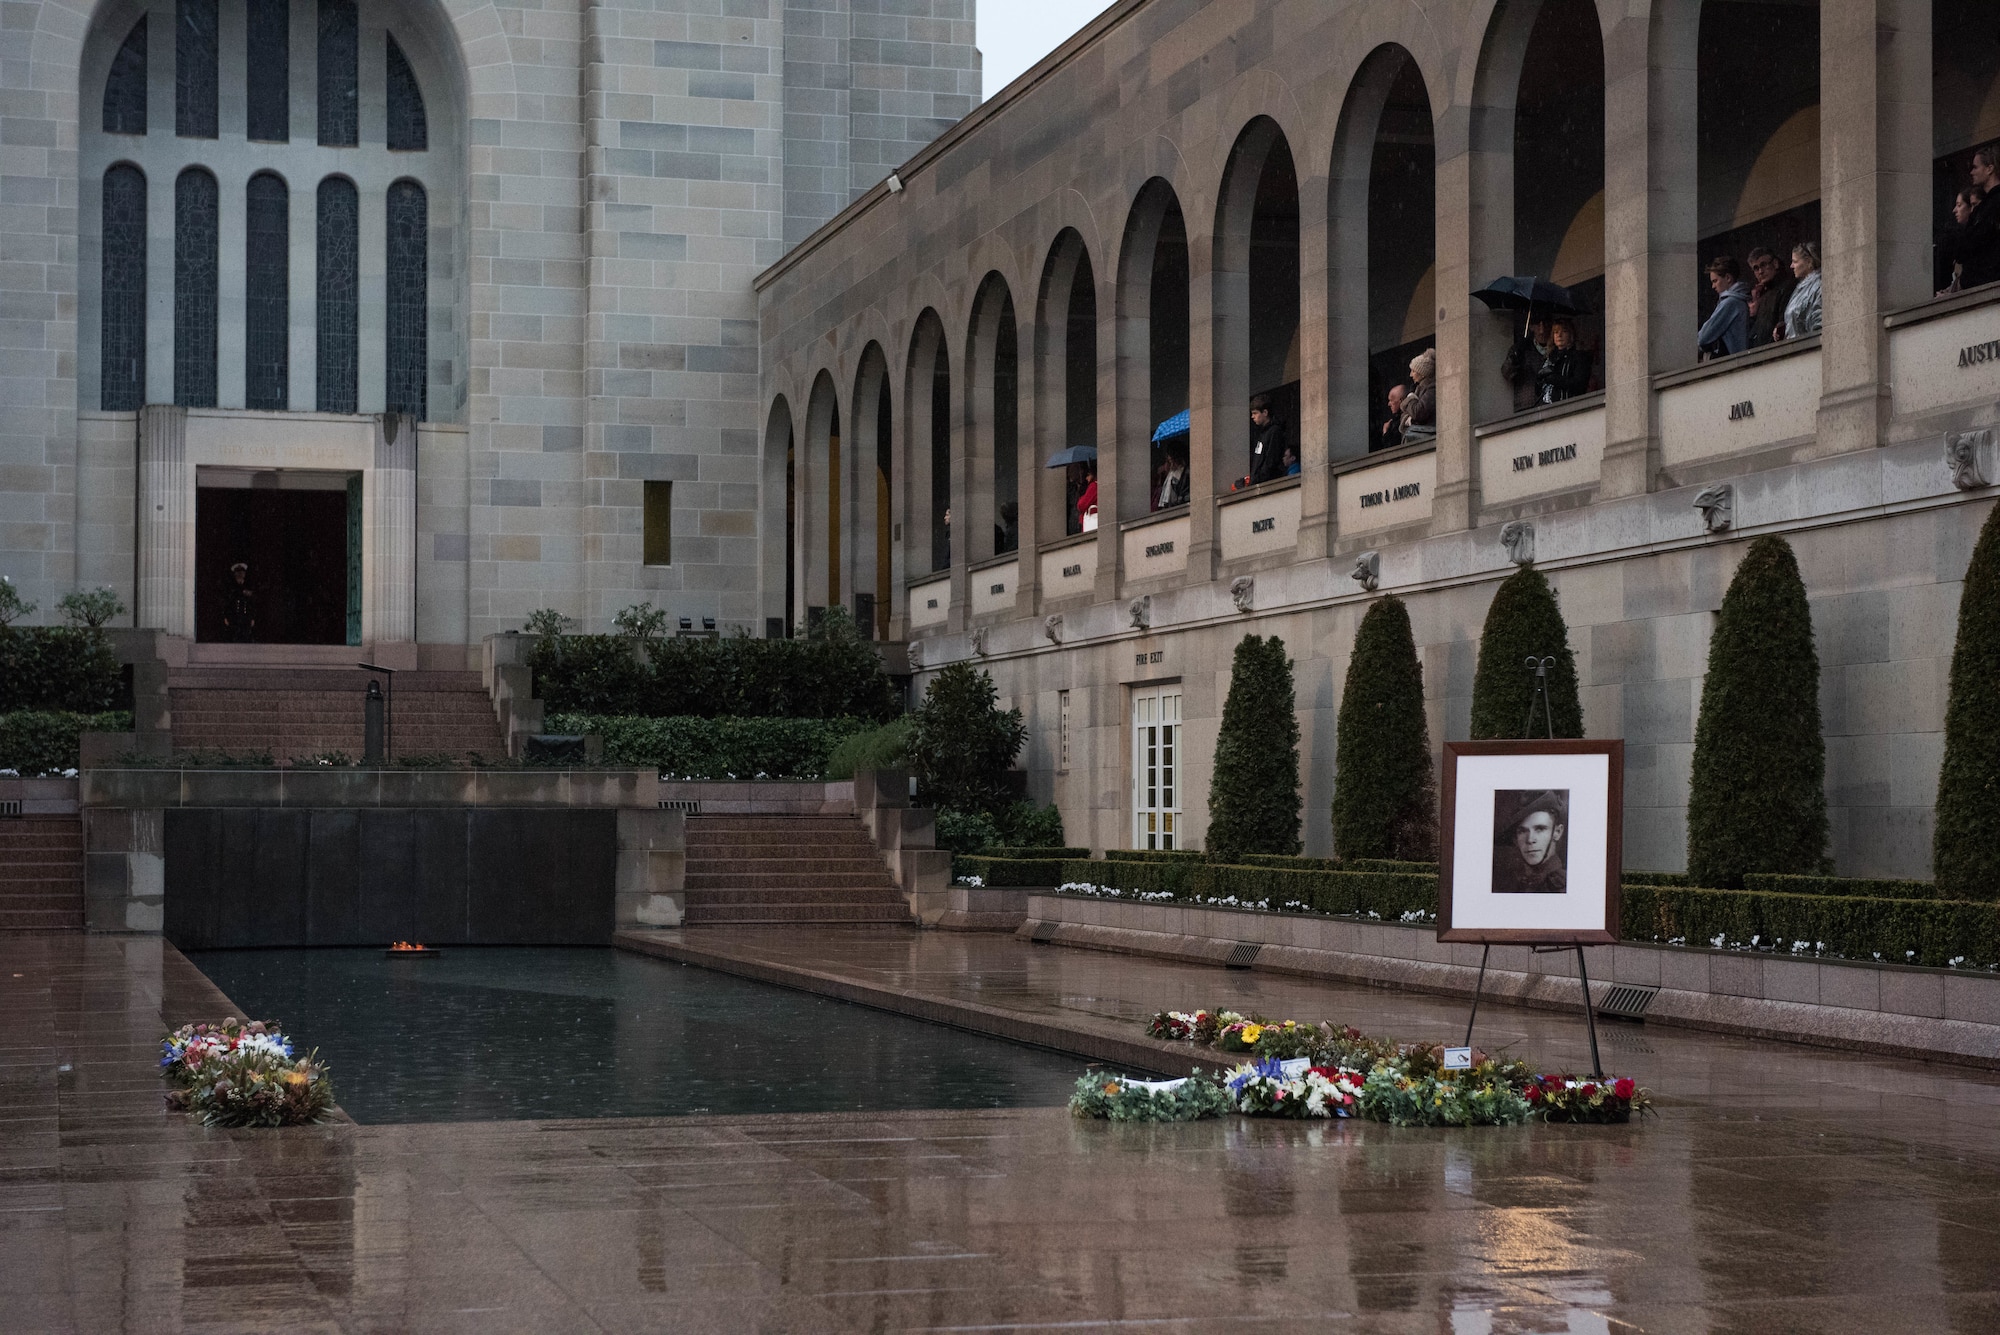 A portrait of Pvt. Robert Young of the Australian Army sits at the base of the pool of remembrance at the Australia War Memorial in Canberra, Australia, Aug. 11, 2018. Young fought in World War II and died March 21, 1944. Gen. CQ Brown, Jr., Pacific Air Forces commander, participated in Young’s “Last Post” ceremony, honoring his service and sacrifice, further demonstrating the strength of the U.S.-Australian alliance.   (U.S. Air Force photo by Staff Sgt. Hailey Haux)